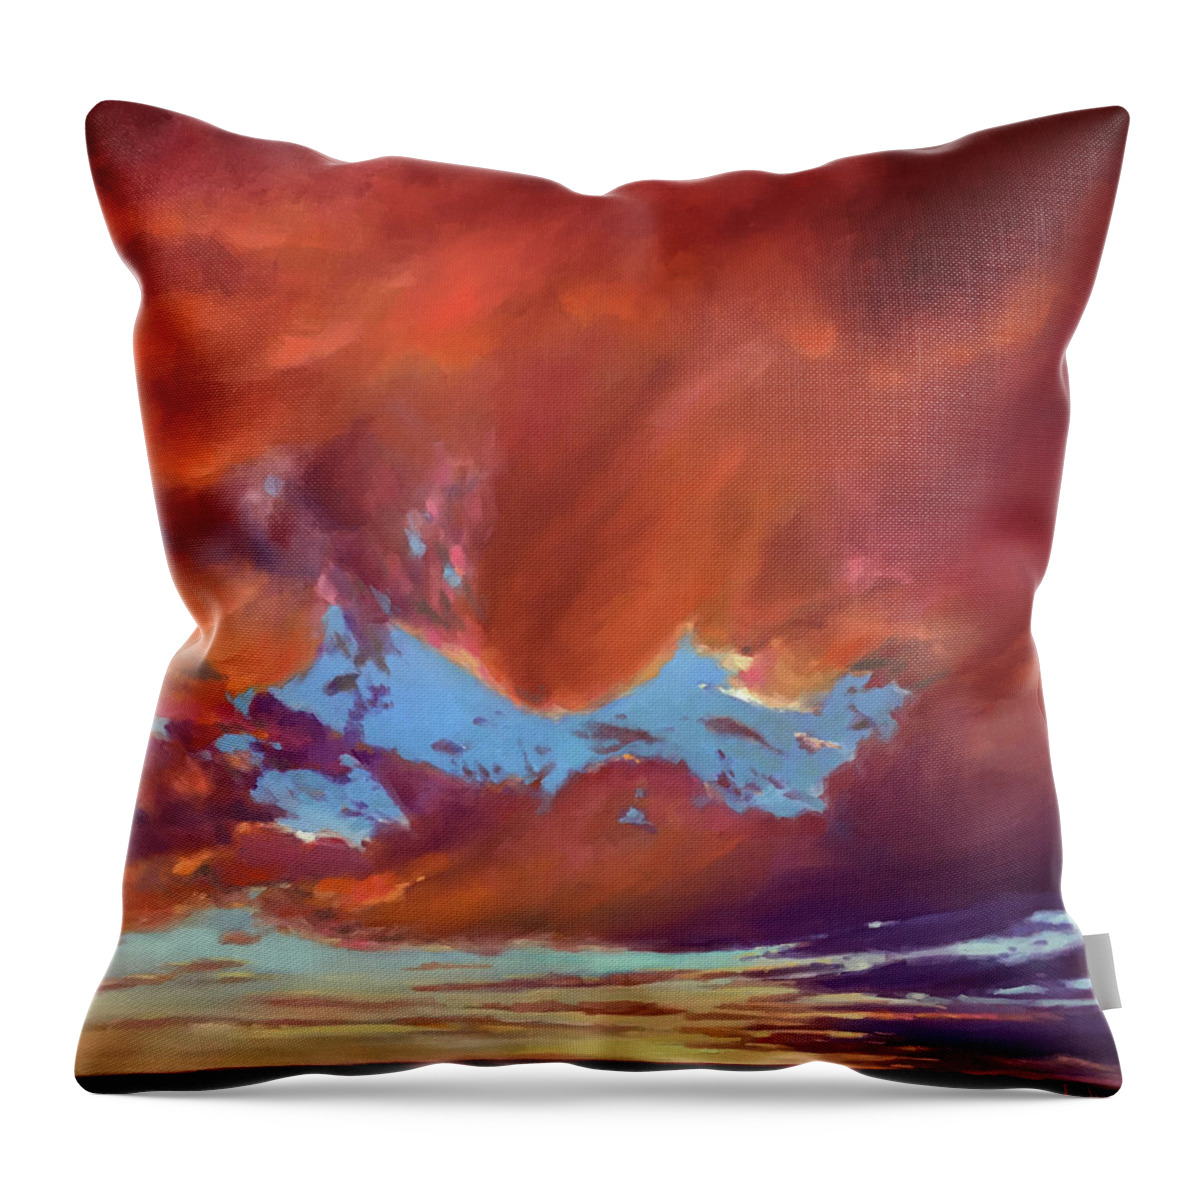 Sunset Throw Pillow featuring the painting Mesa Sunset by Elizabeth Jose